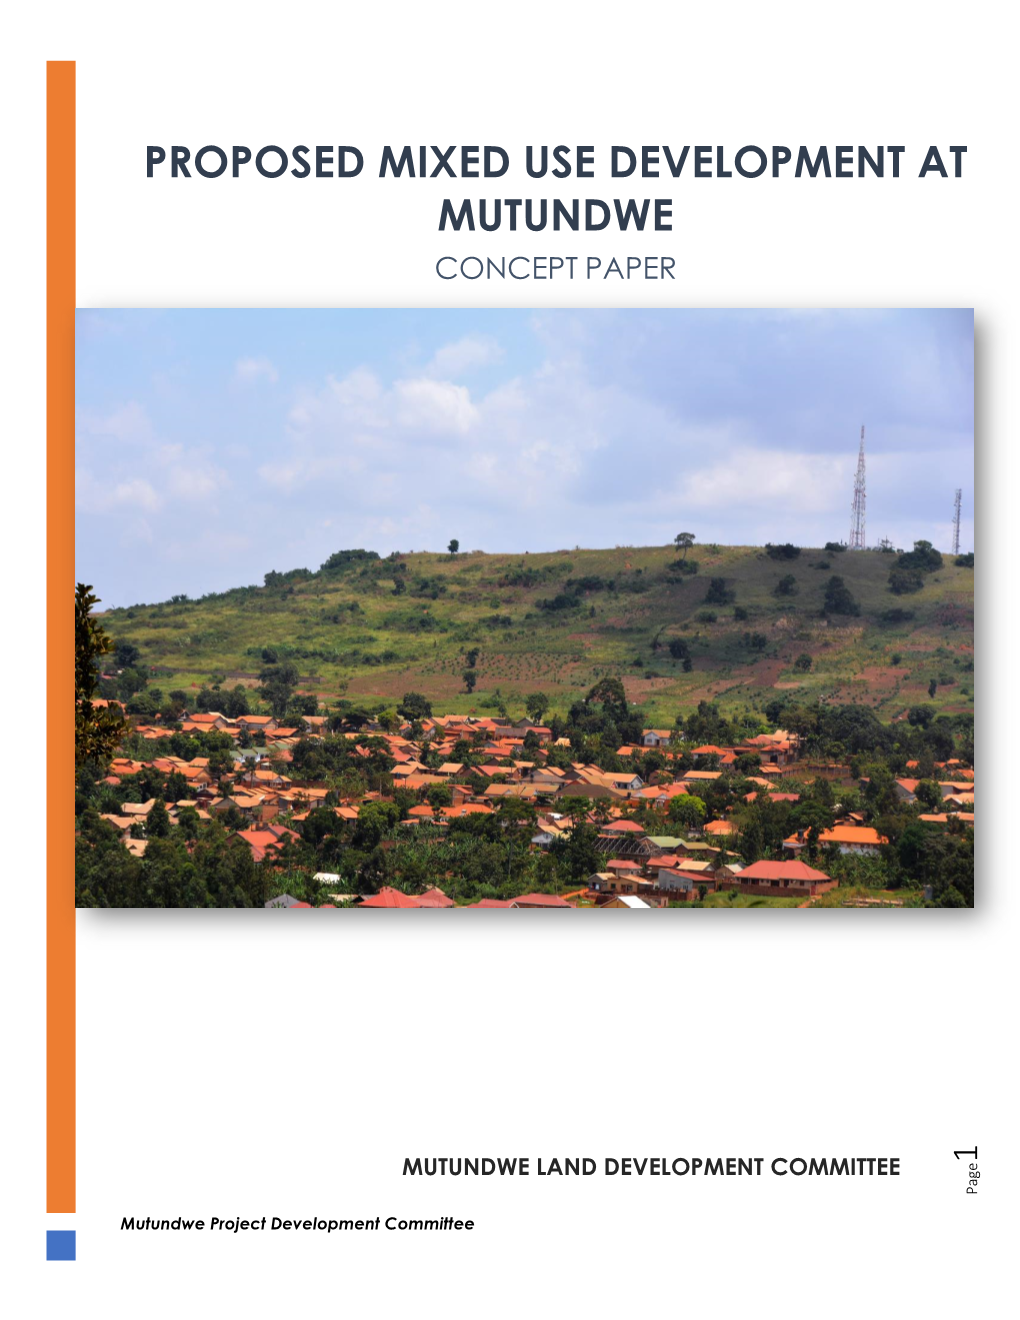 Proposed Mixed Use Development at Mutundwe Concept Paper